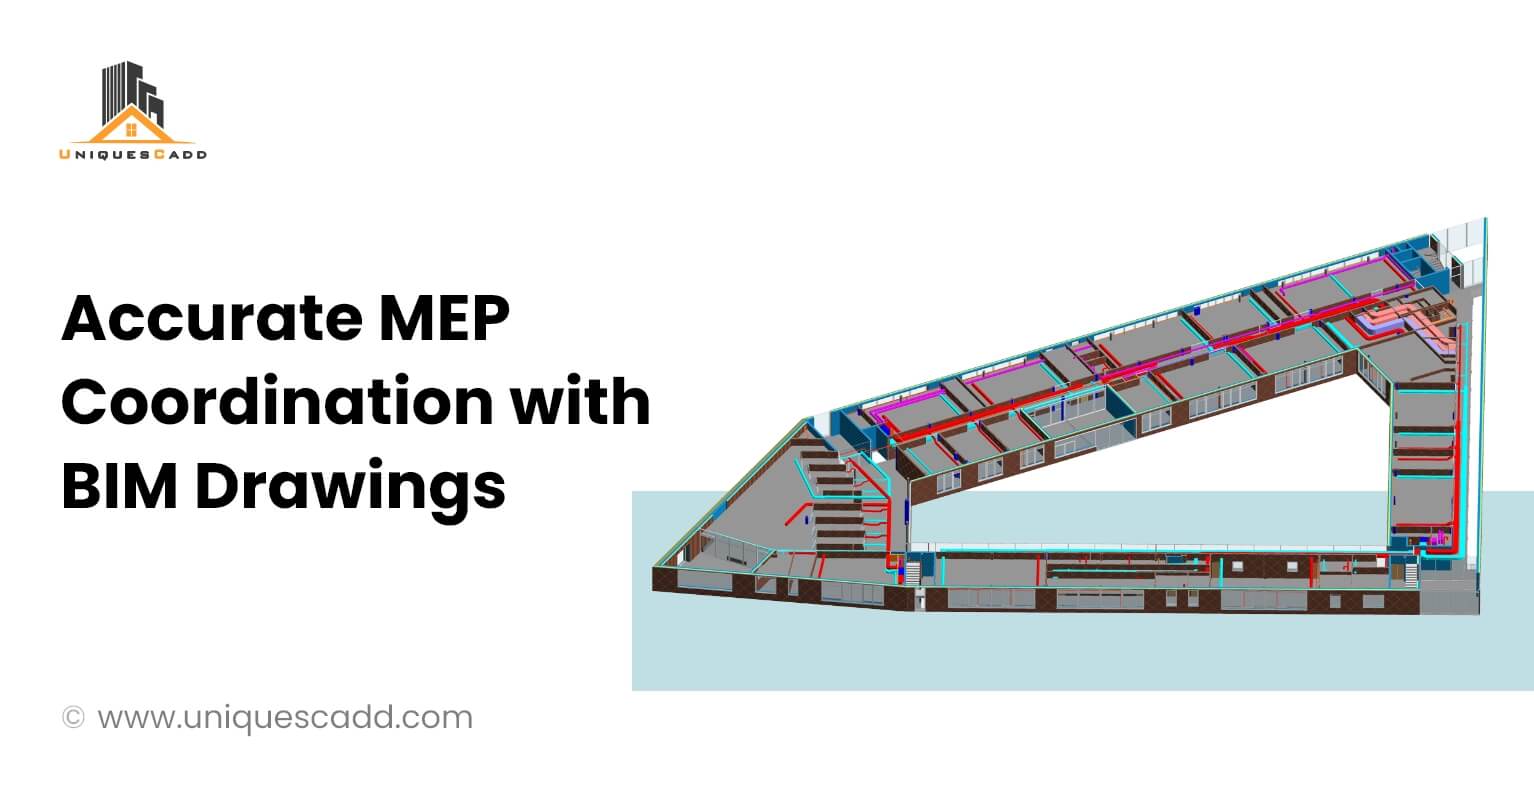 Accurate MEP Coordination with BIM Drawings